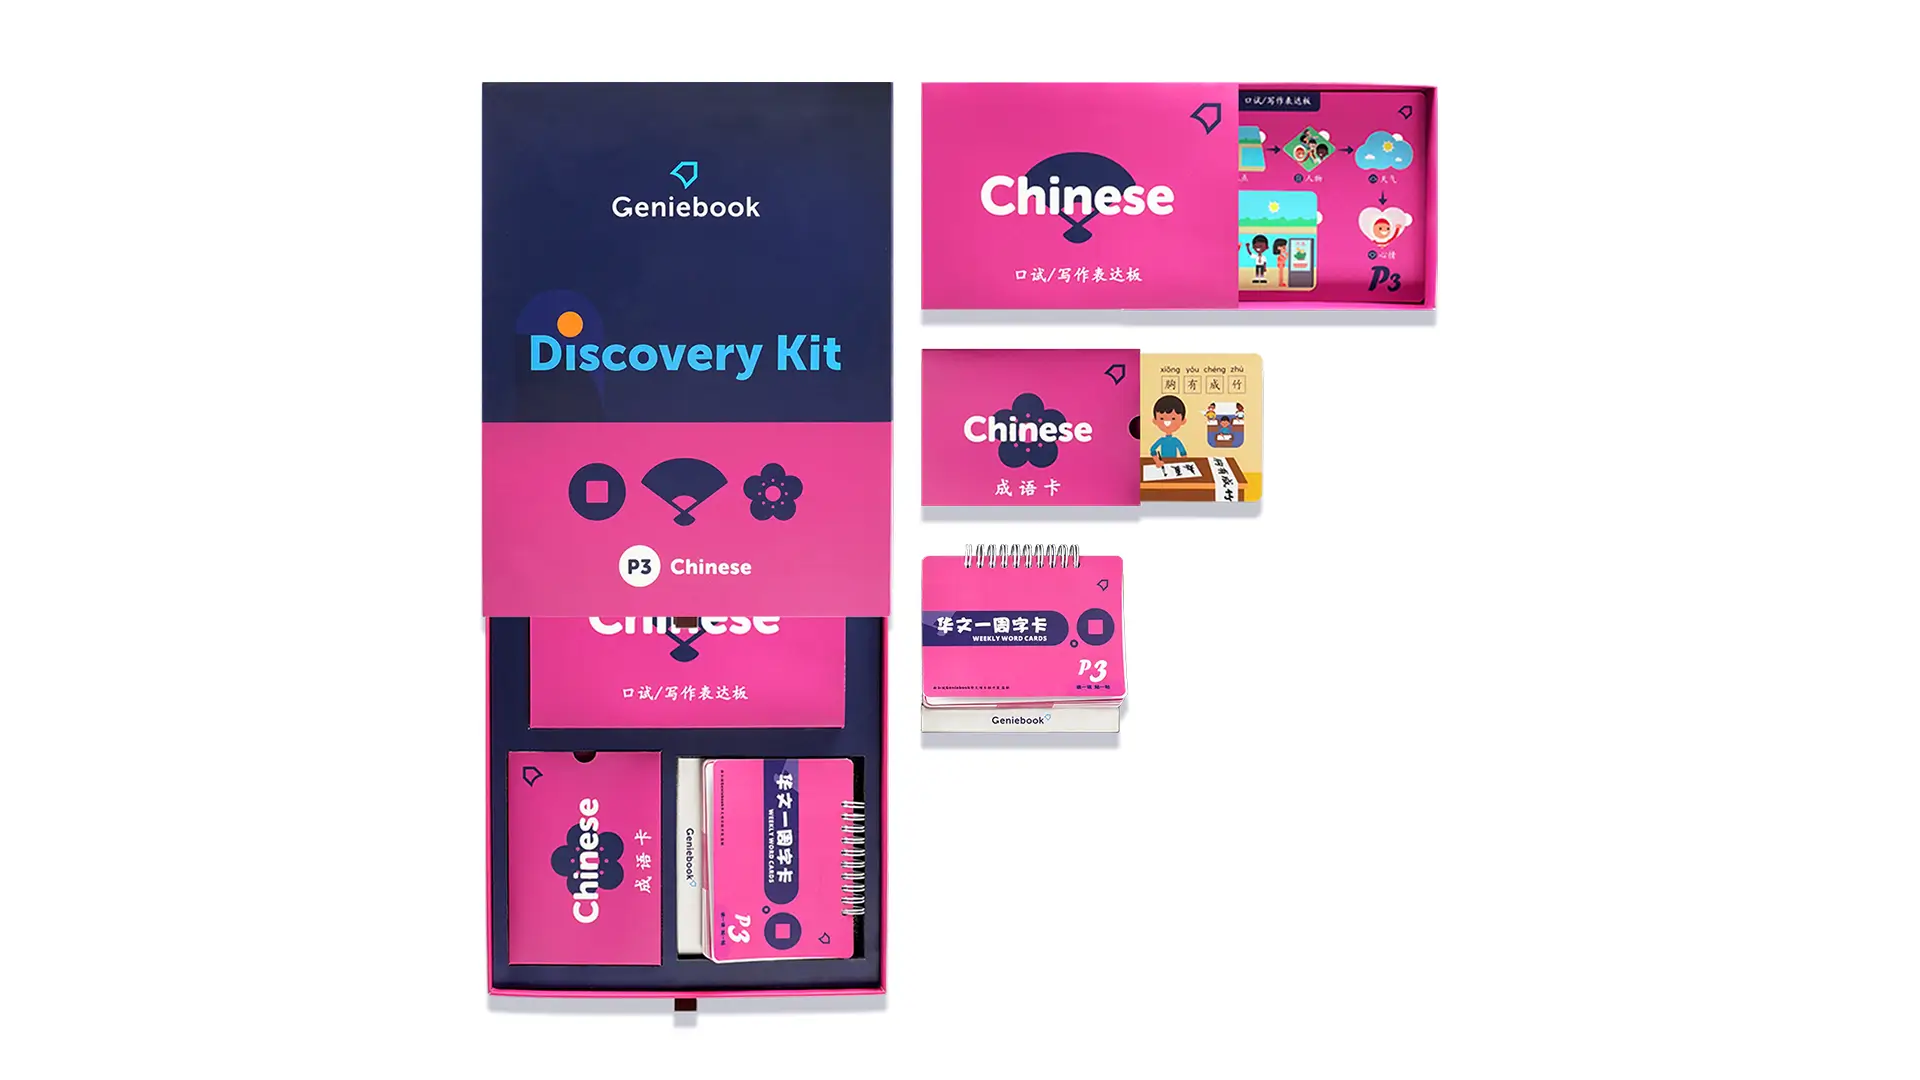 Geniebook Chinese: What's in the Discovery Kit?